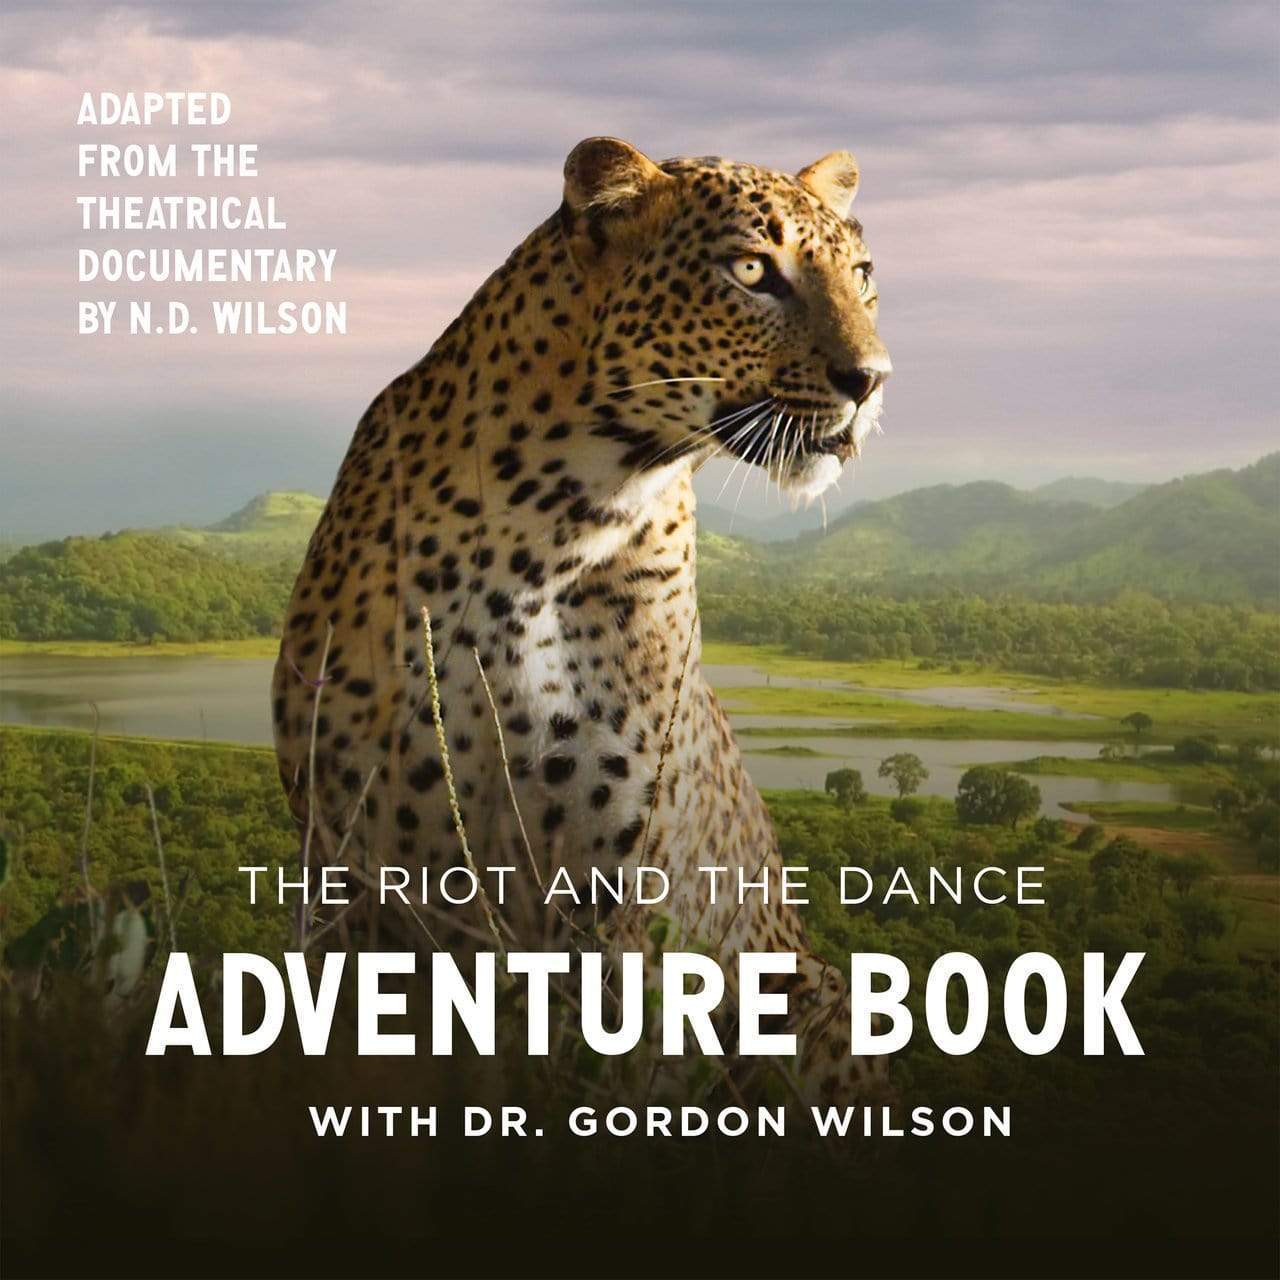 The Riot and the Dance Adventure Book